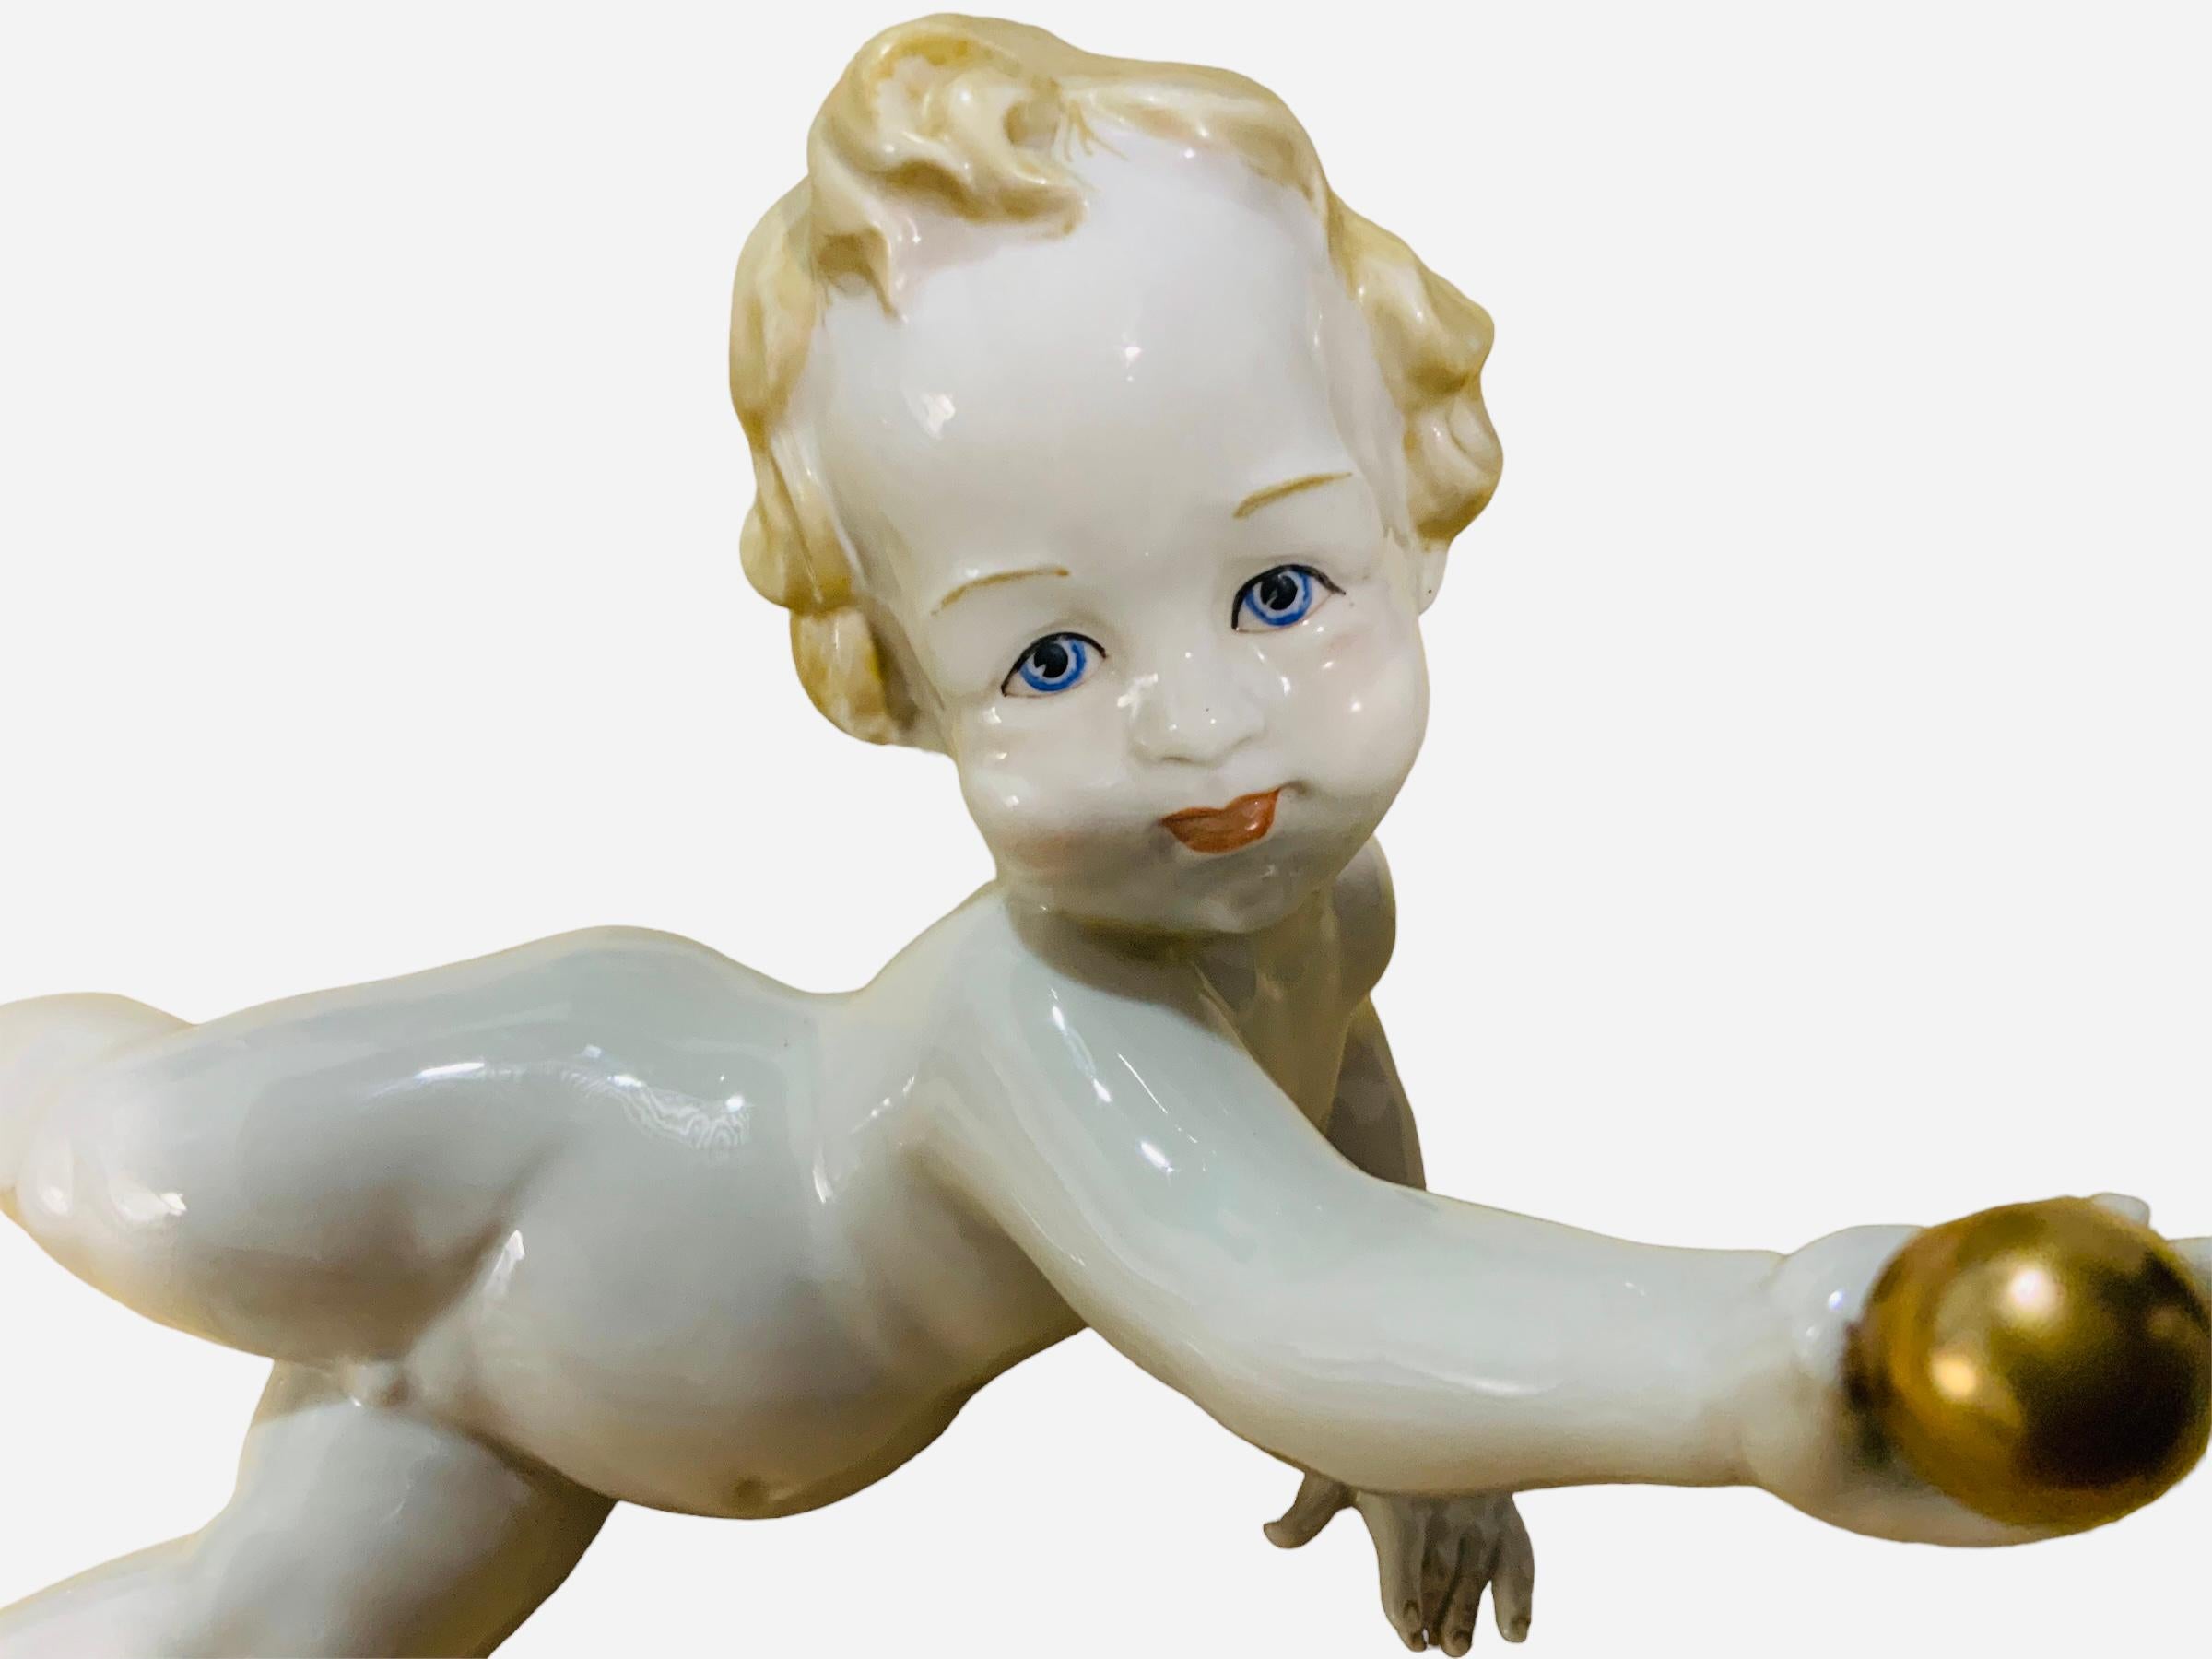 This is an Italian Capodimonte Porcelain Baby Boy Piano Figurine. It depicts a joyful nude baby boy with blonde curly hair and large blue eyes laying down in one side and holding a gold ball with one hand. Below the baby base is hallmarked G with a